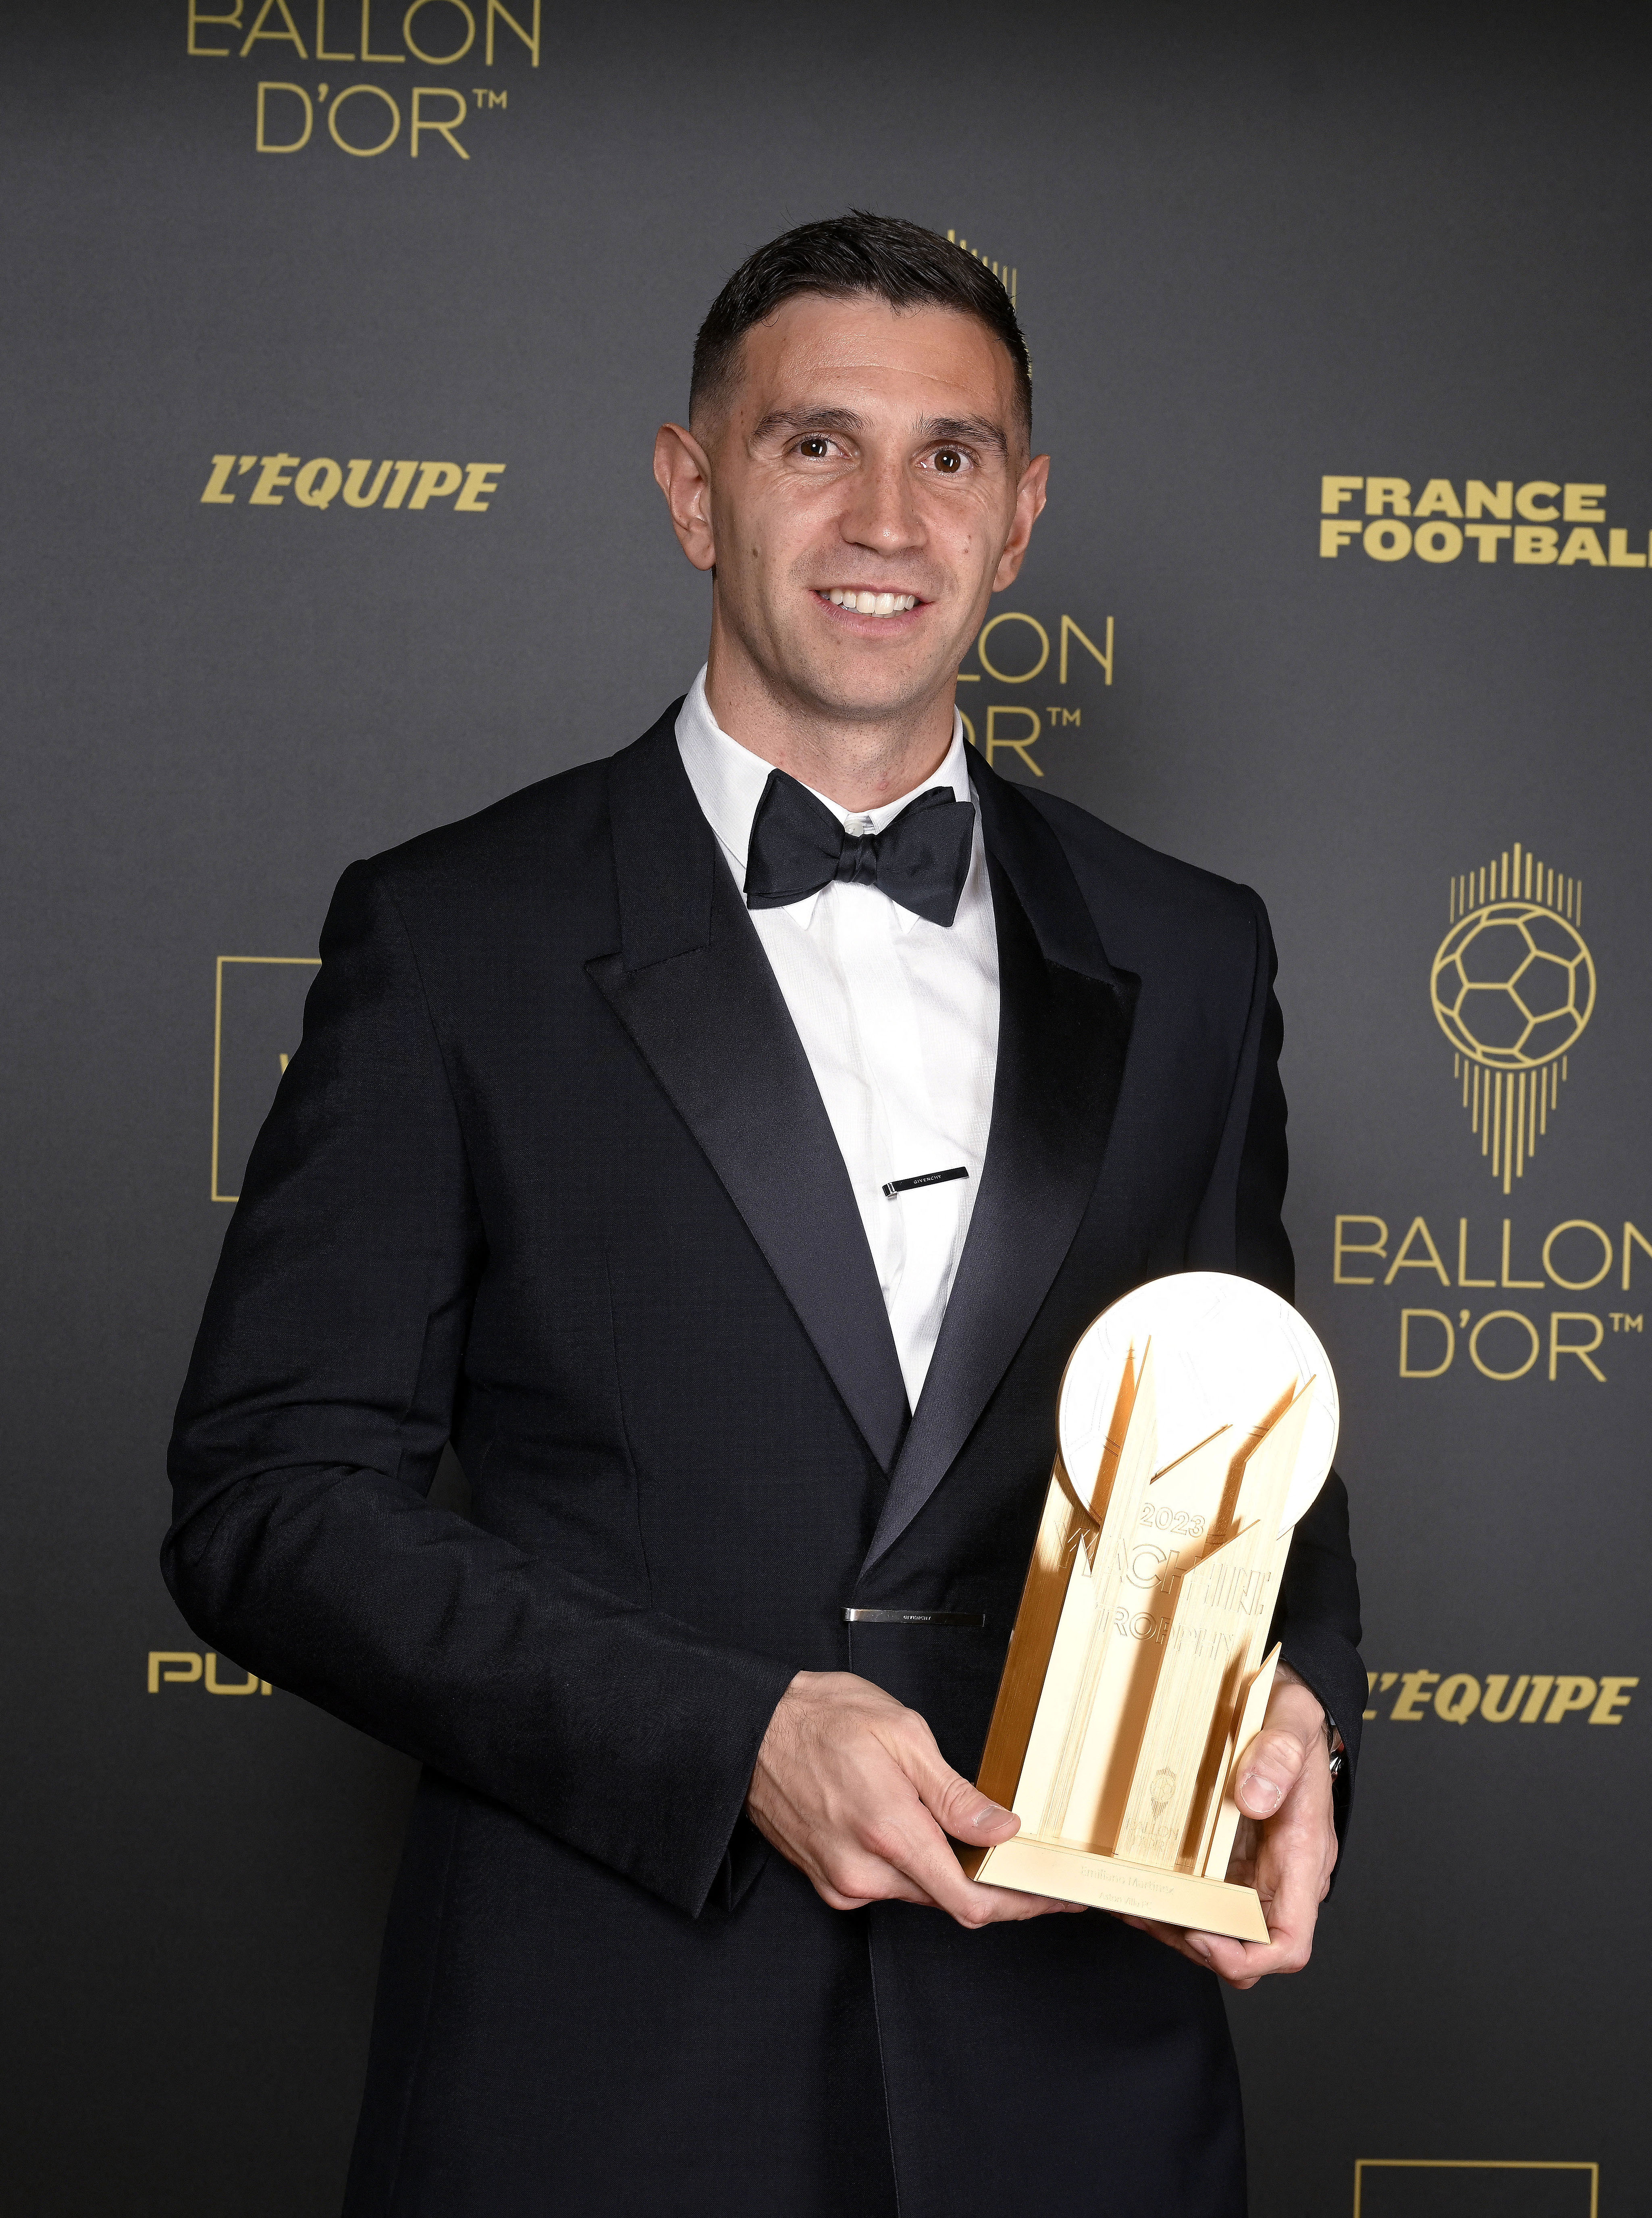 Emiliano Martinez was named as the best keeper of the year